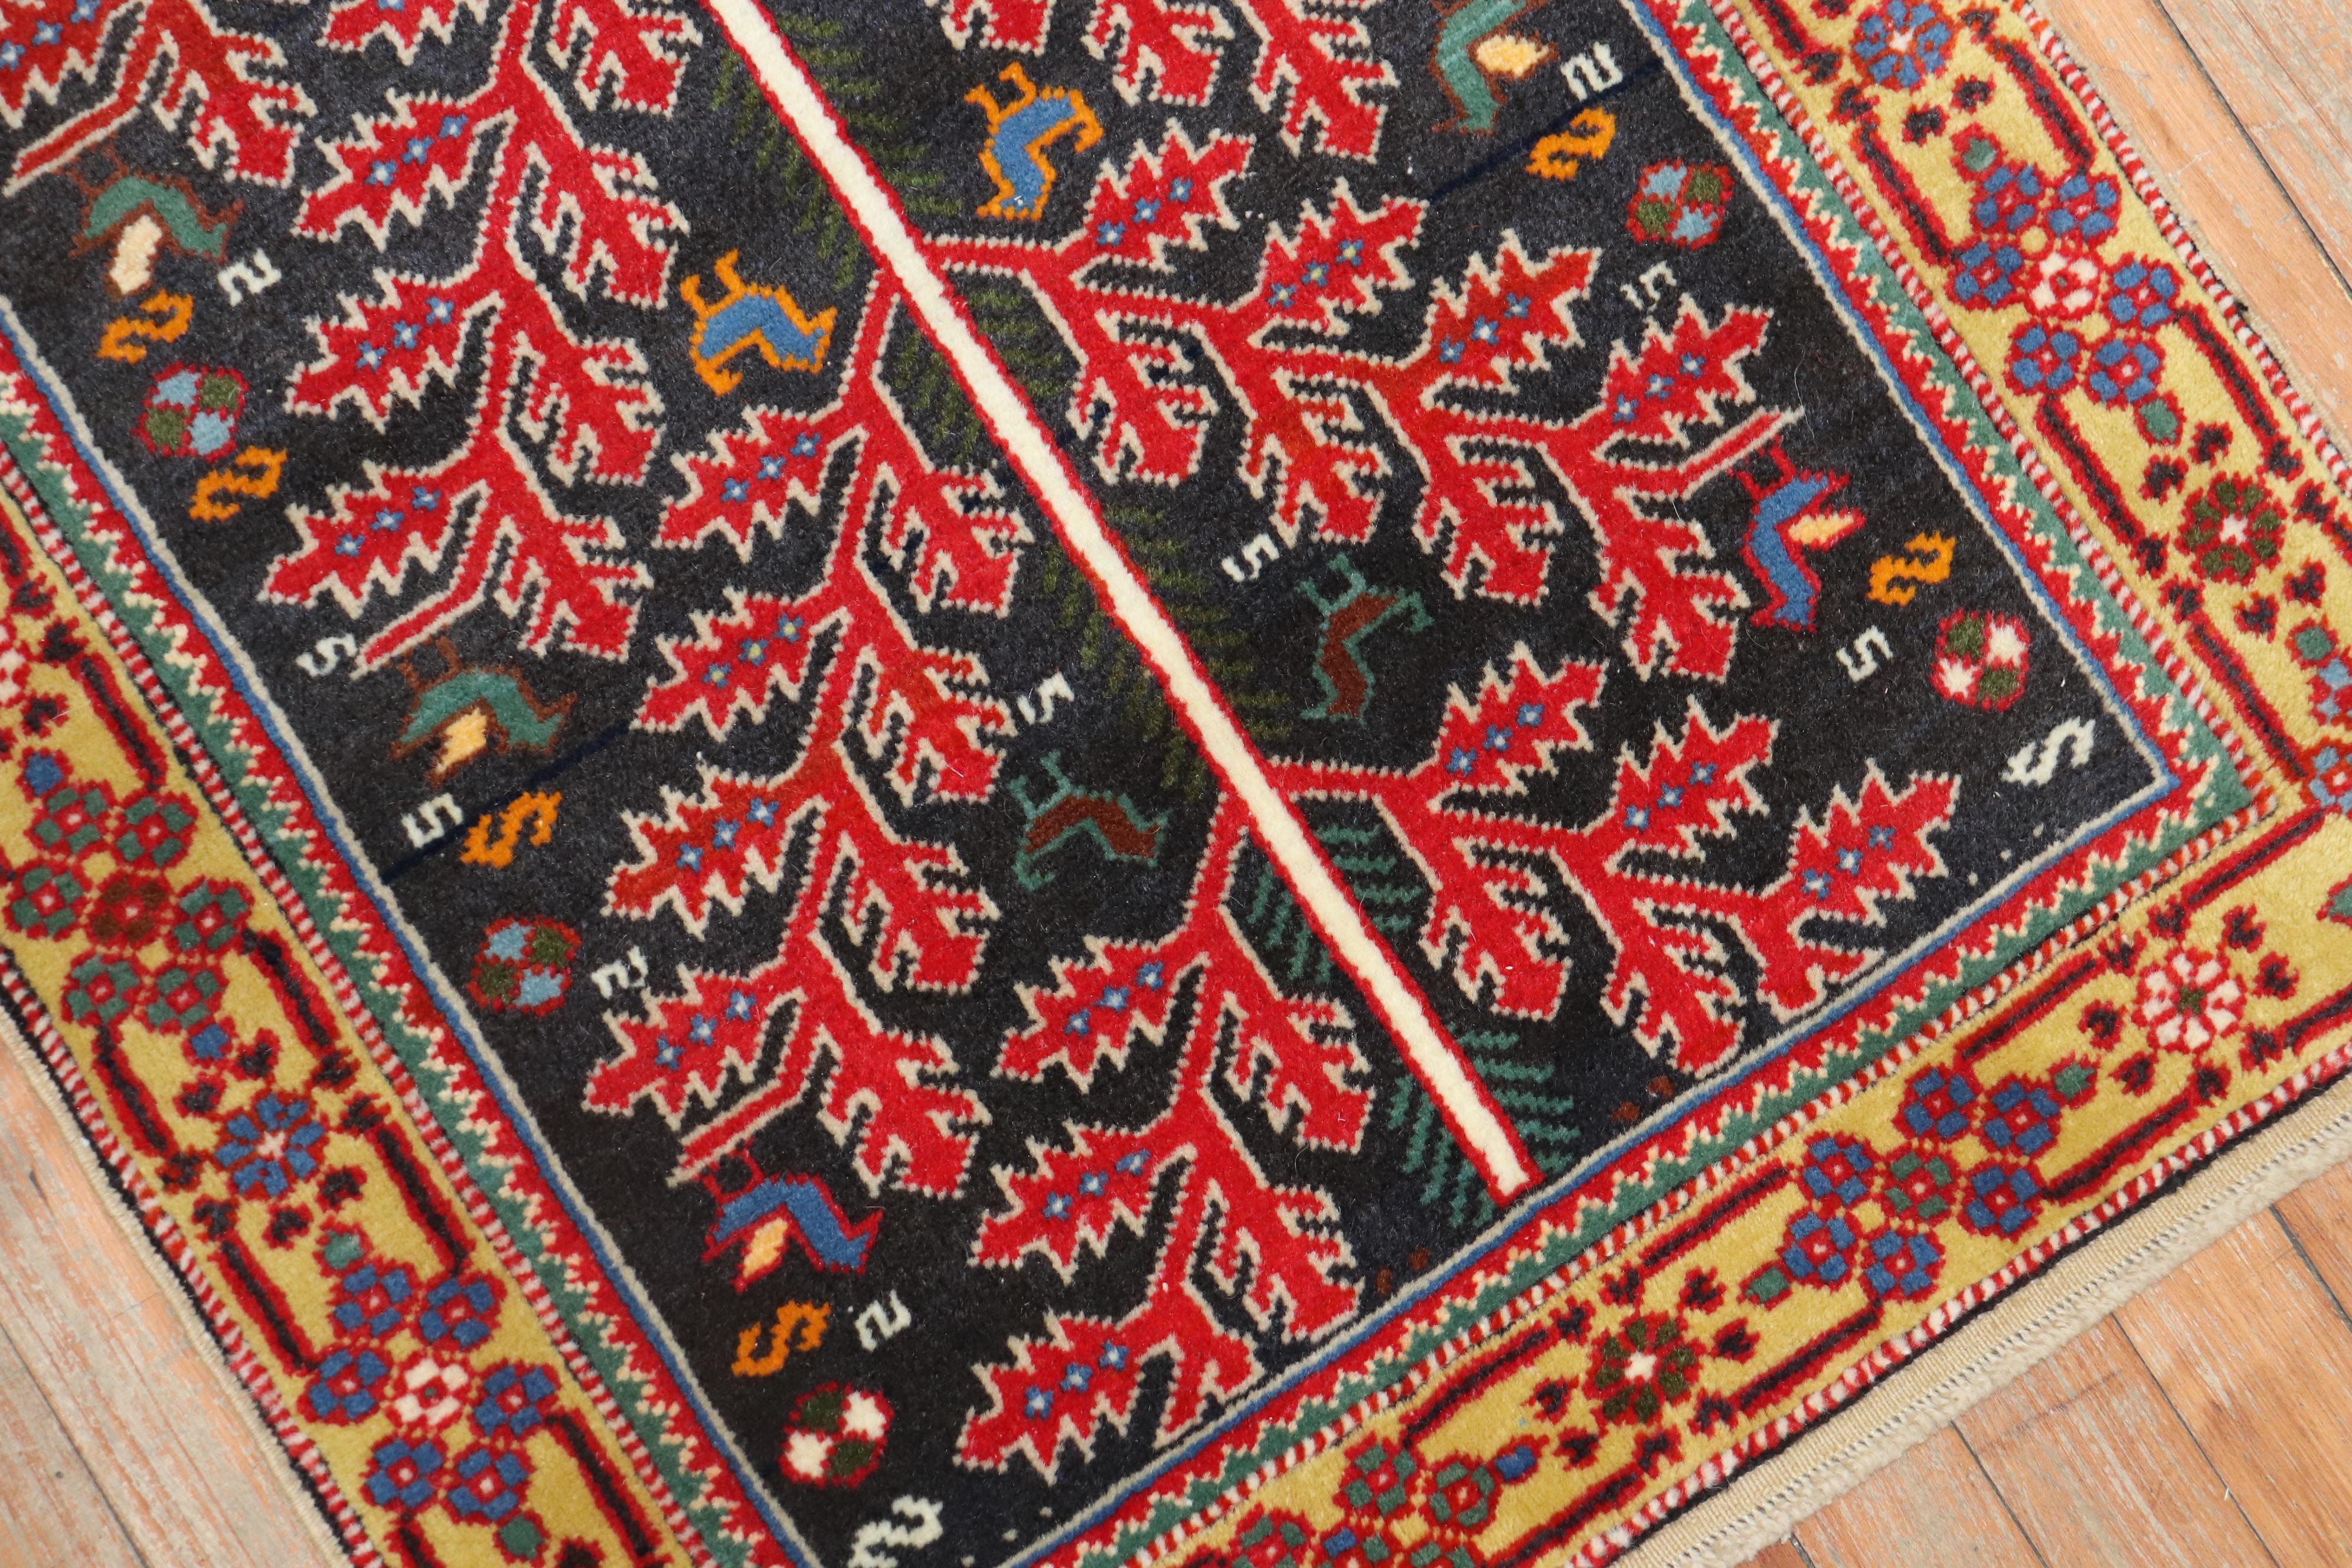 Mid-20th century Persian rug with a colorful Primitive all-over design on a dark background

 Measures: 2'3